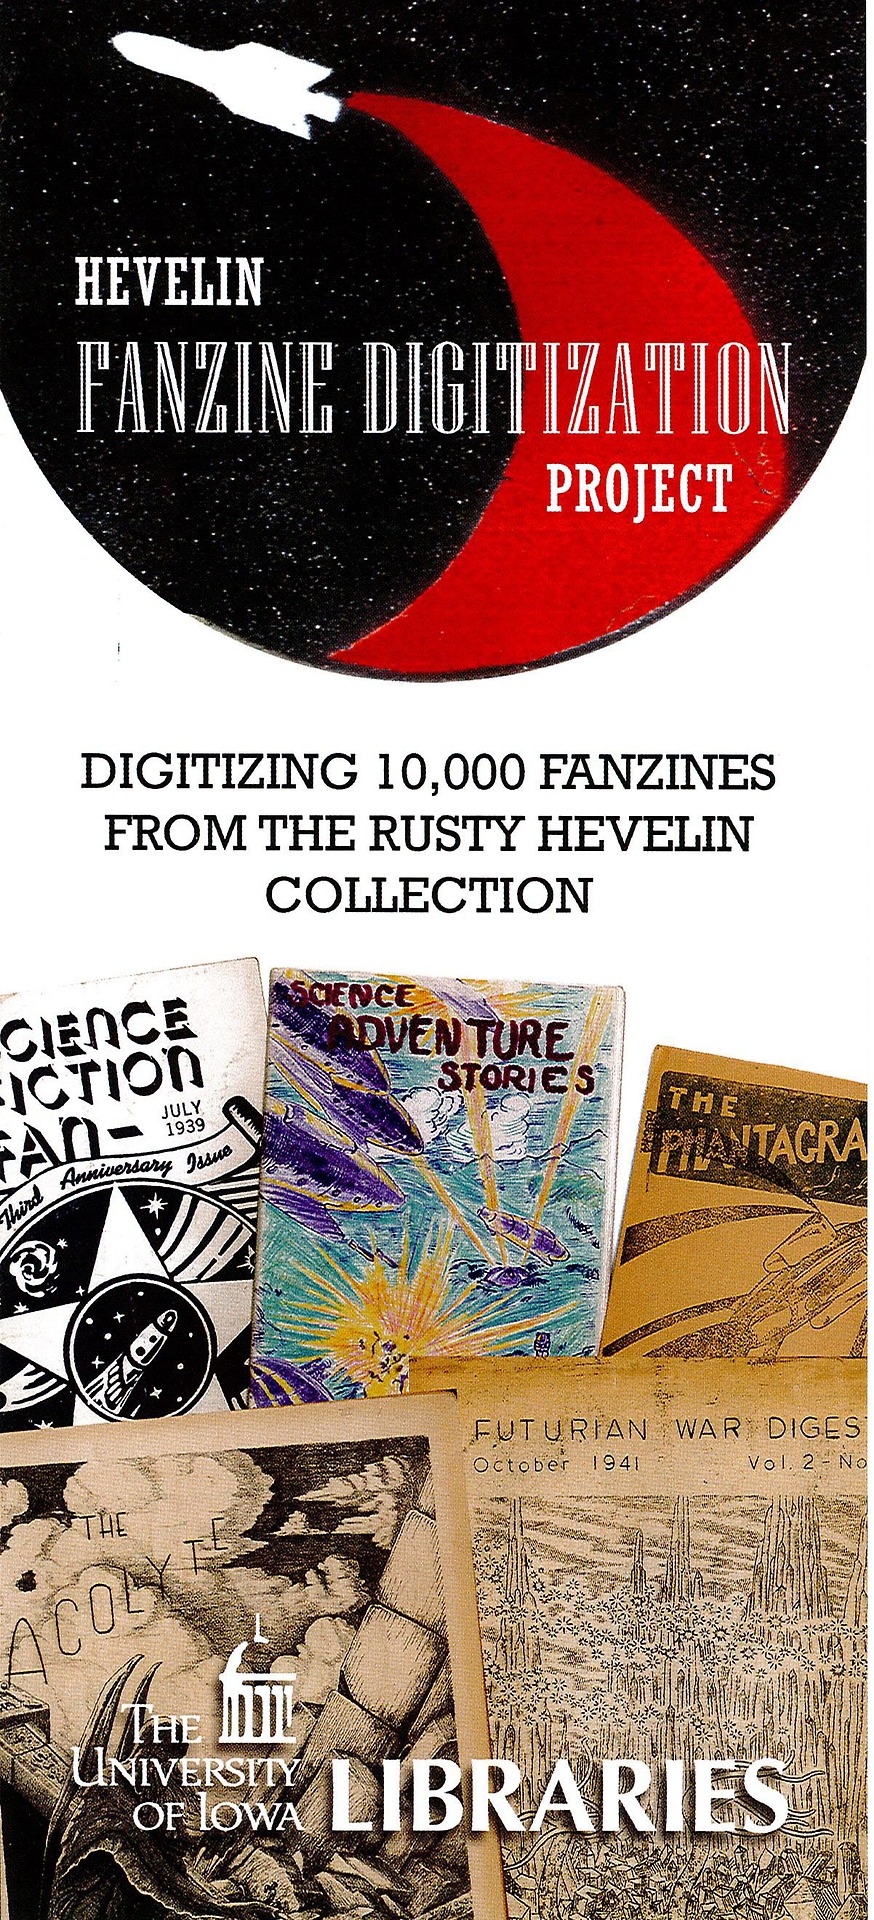 Univeristy of Iowa Libraries to digitize 10,000 Science Fiction fanzines